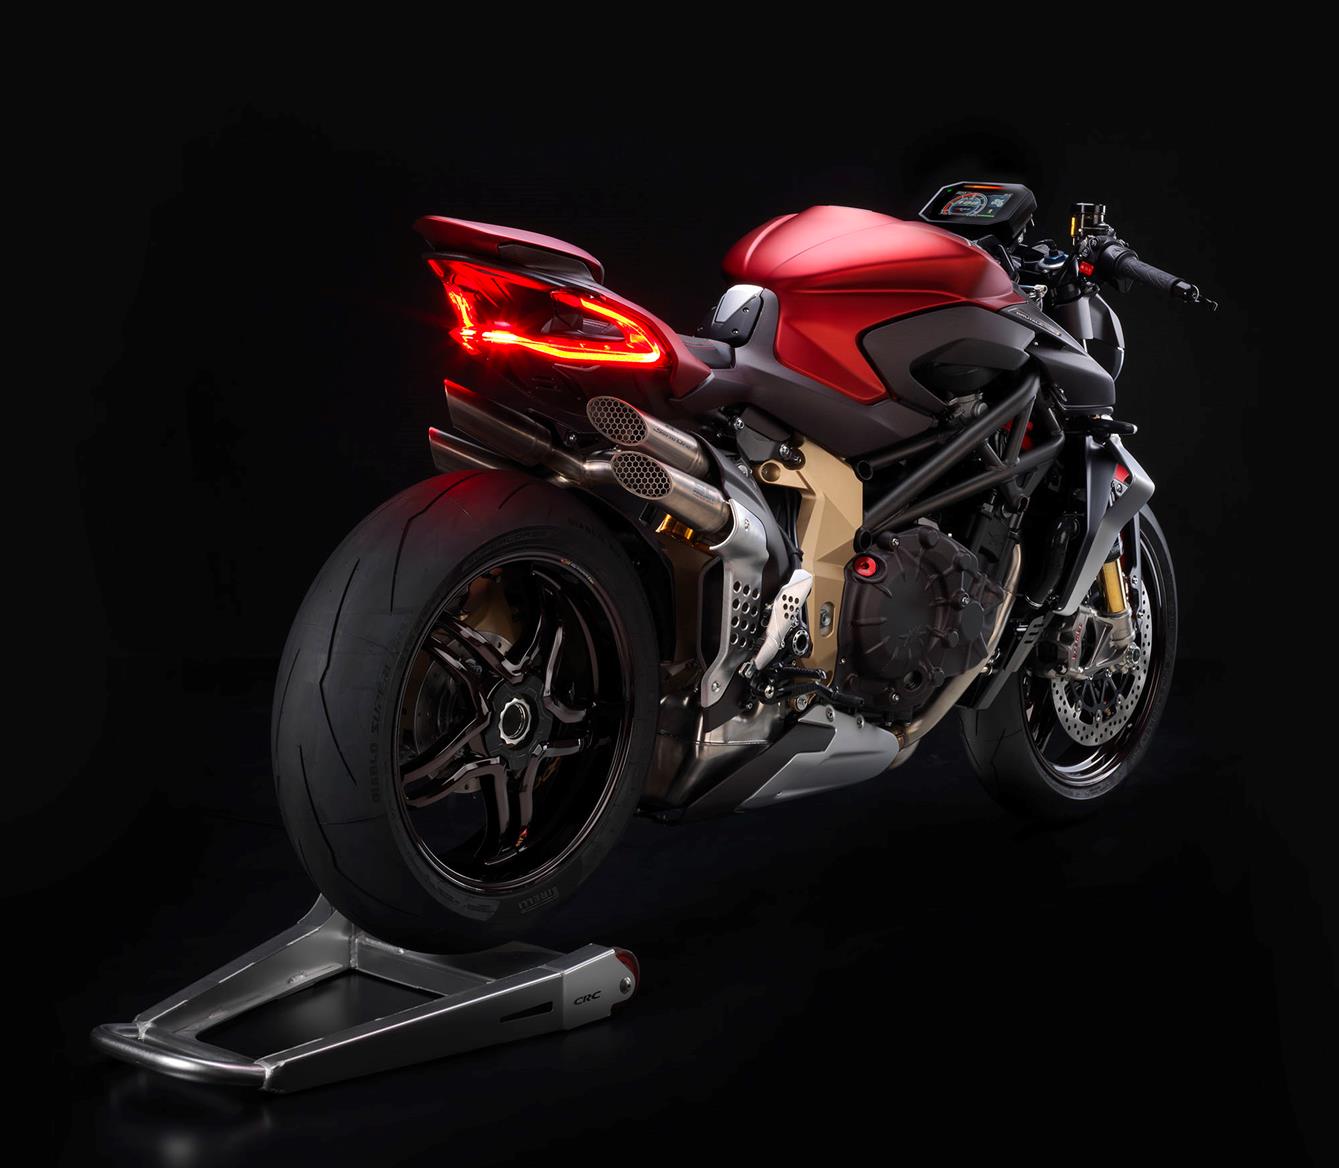 2020 MV Agusta Brutale 1000 Prototype Review - Cycle News